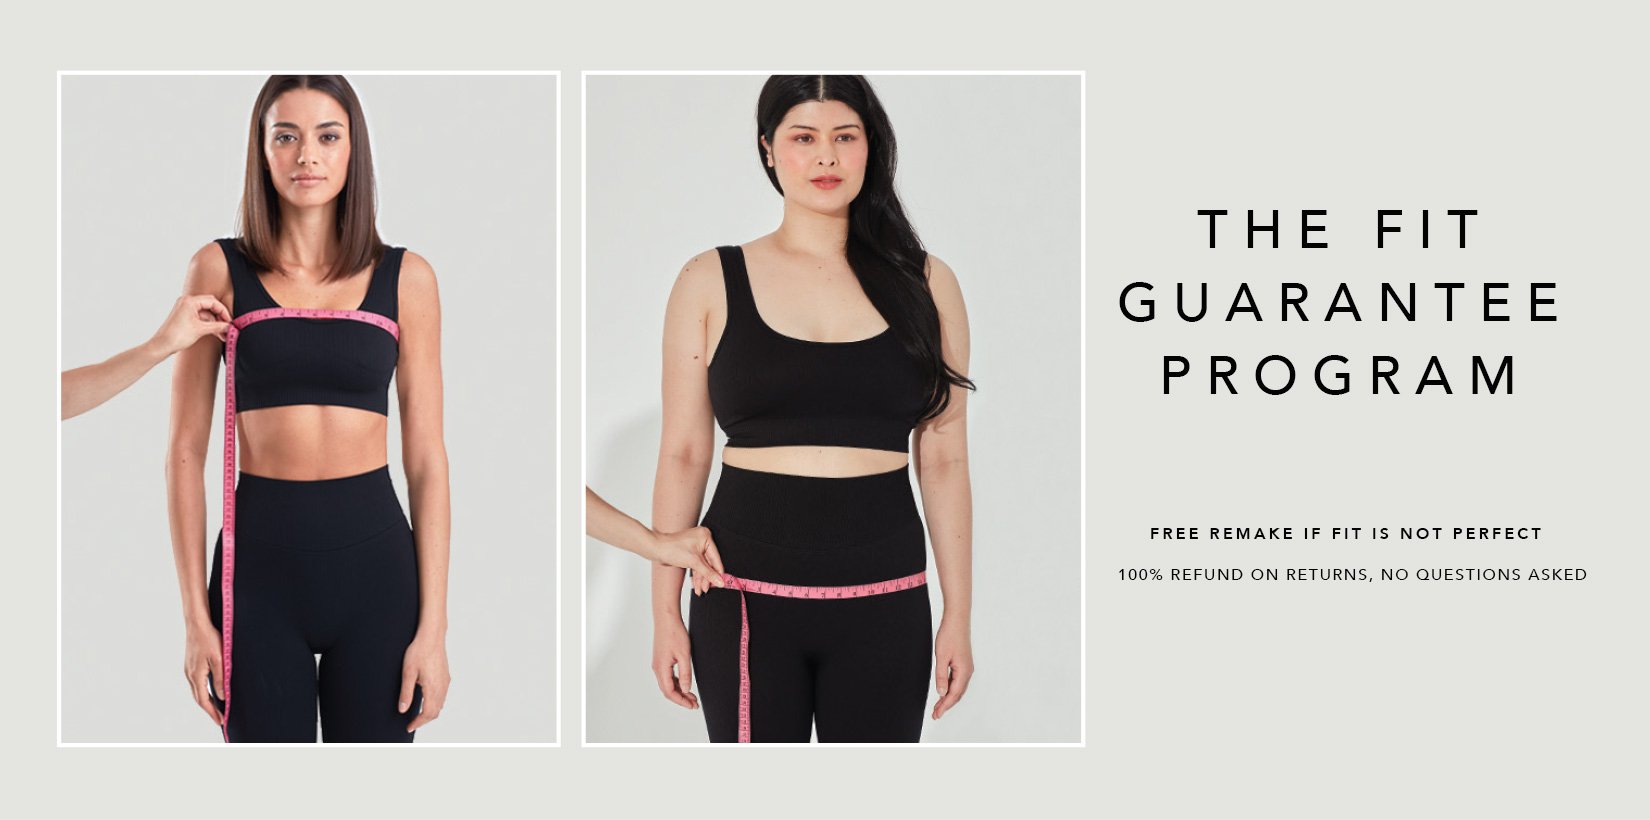 The fit guarantee program. free remake if fit is not perfect. 100% refund on returns, no questions asked